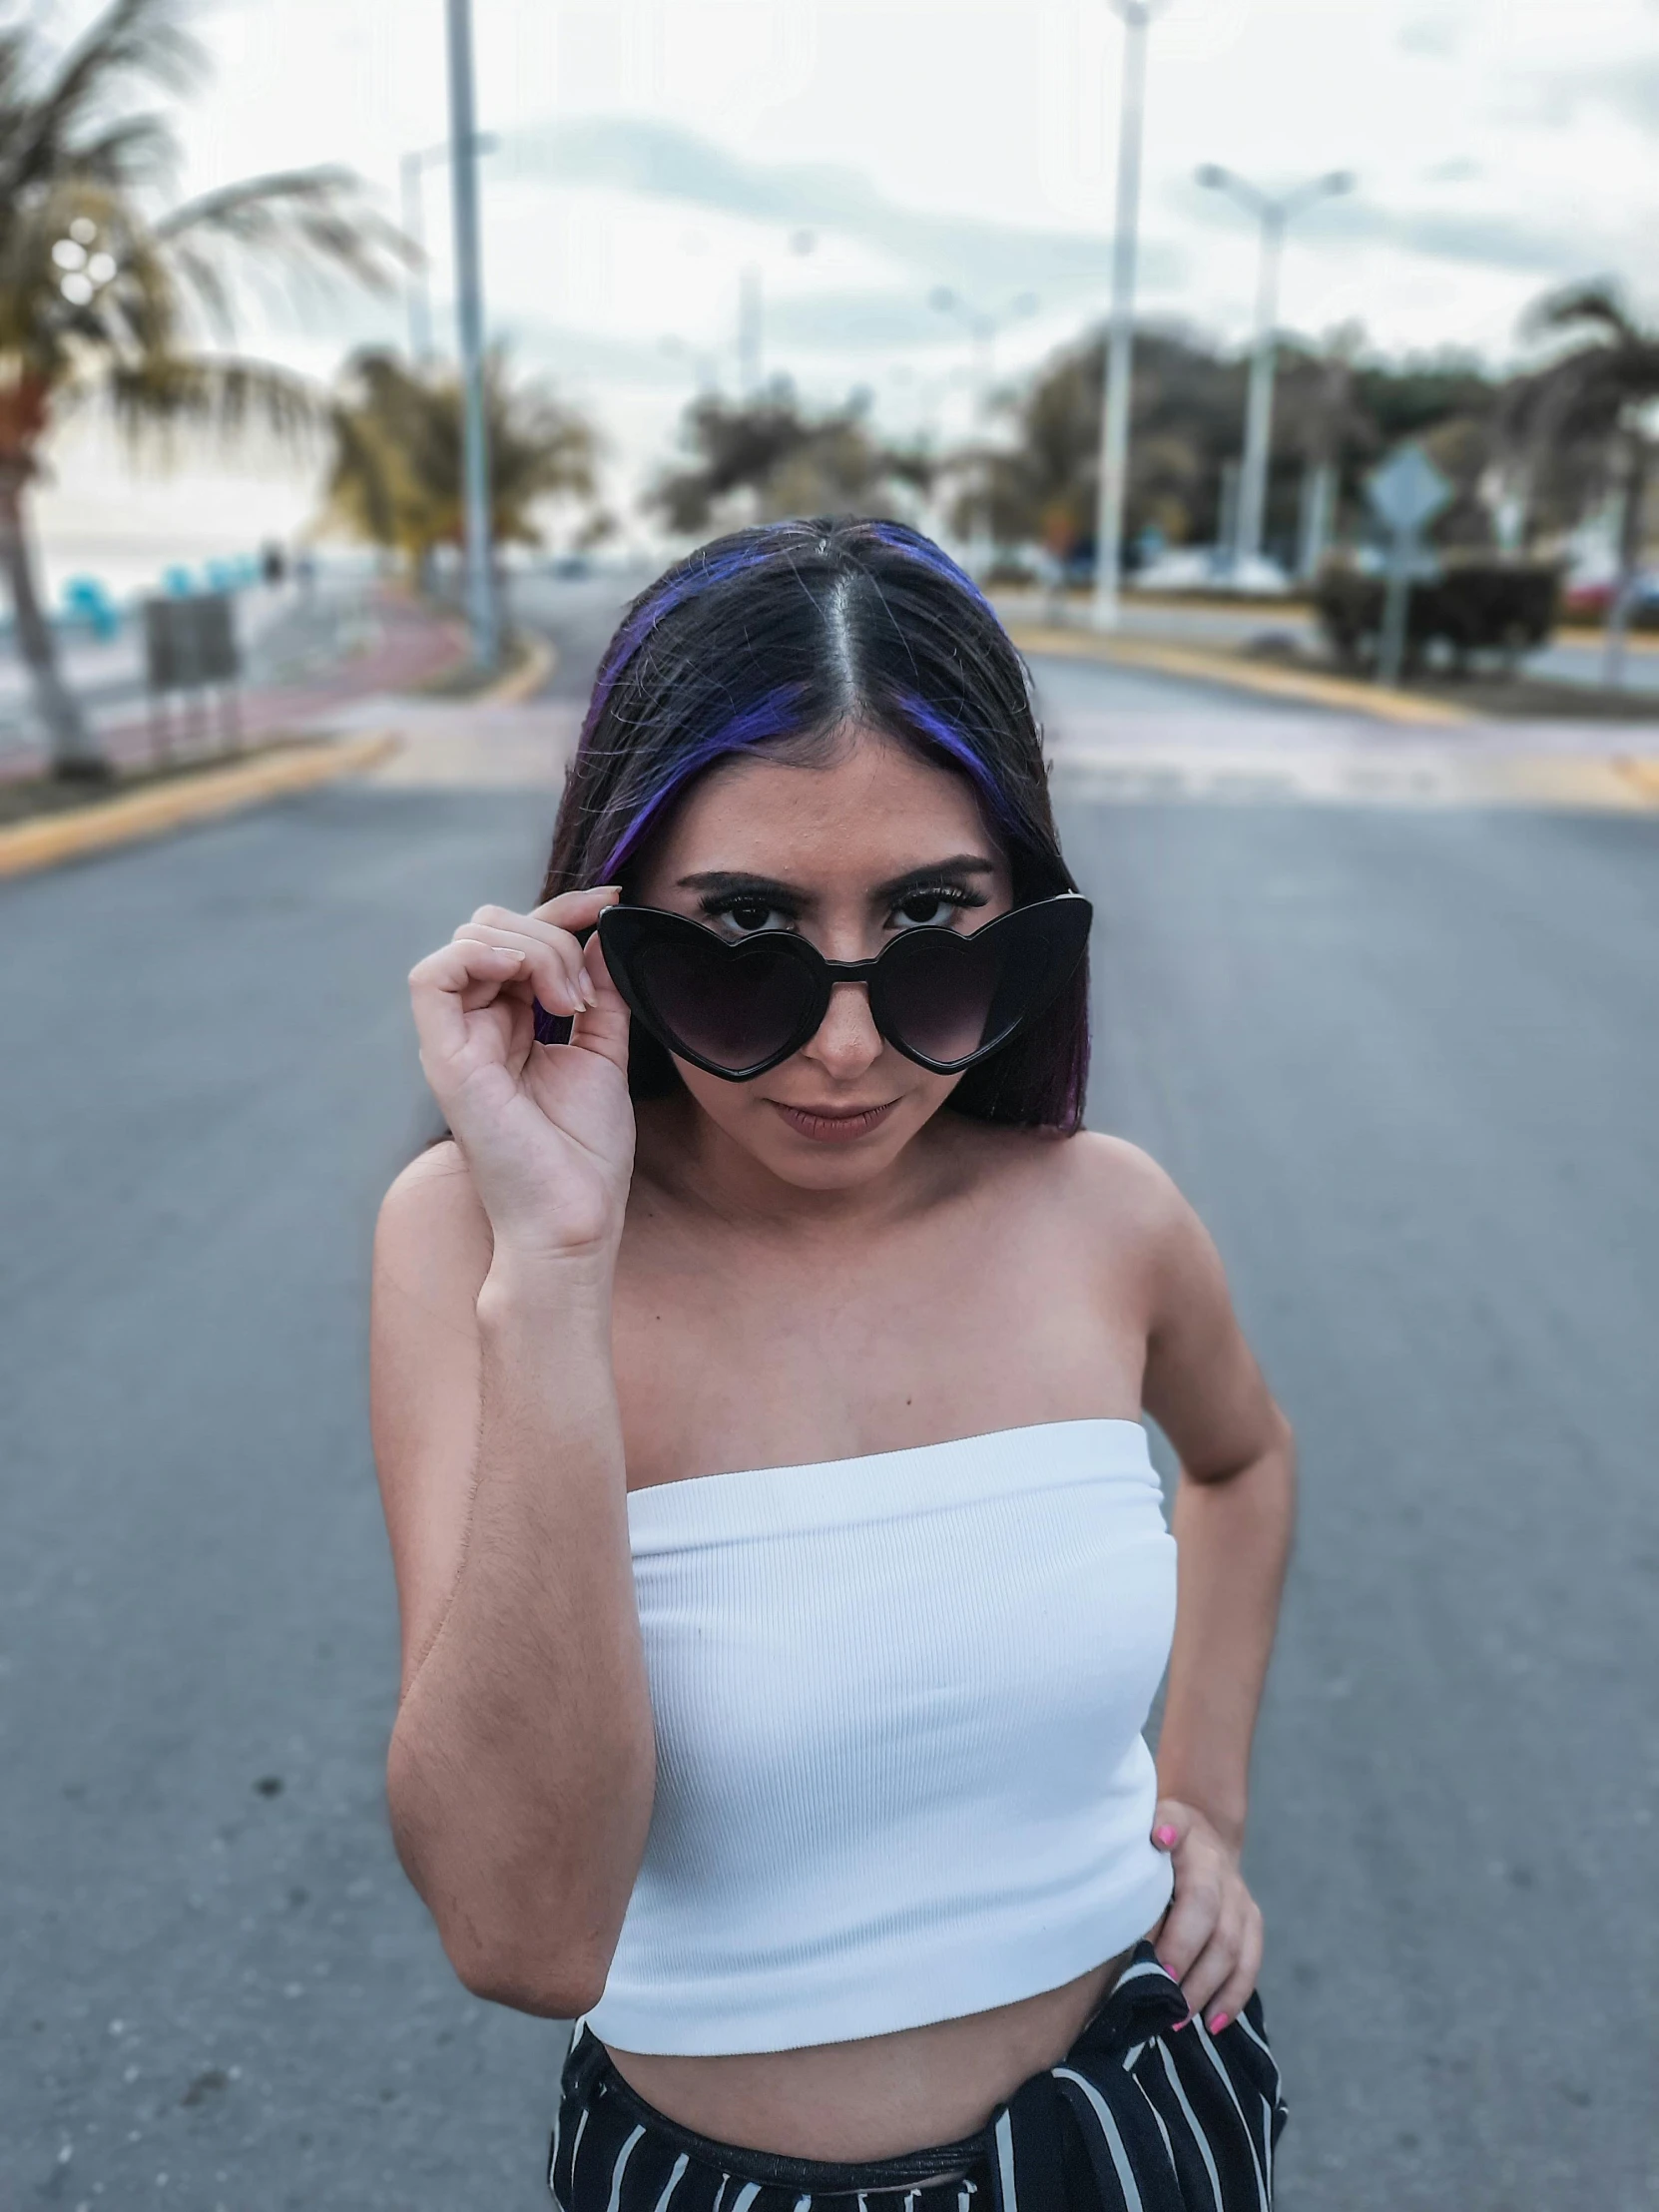 a woman with blue hair wearing sunglasses